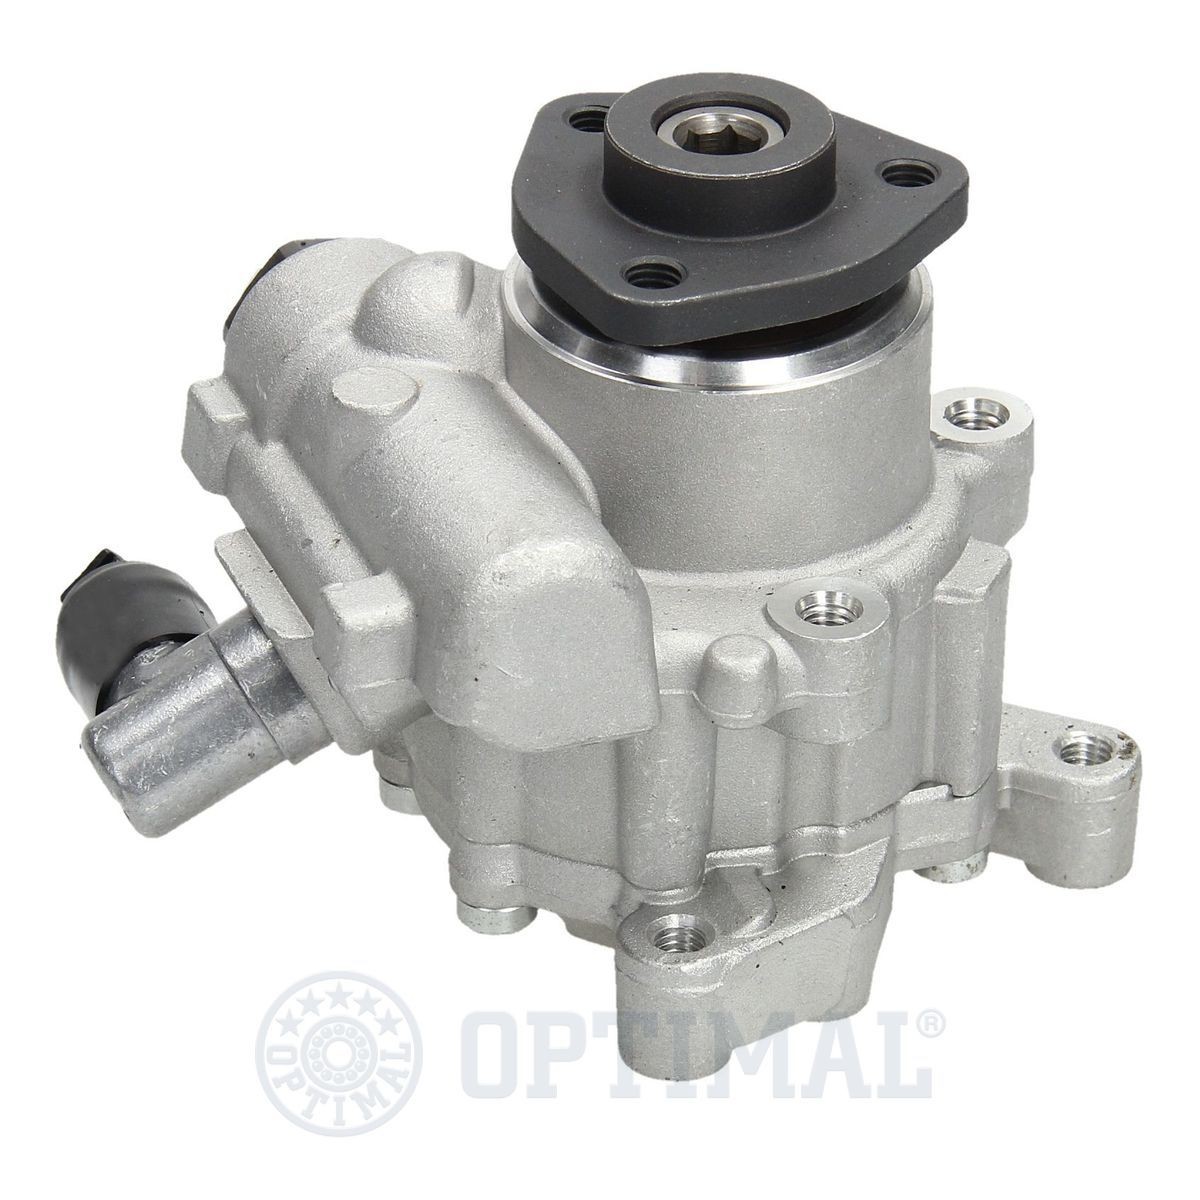 OPTIMAL Hydraulic steering pump HP-898 suitable for MERCEDES-BENZ ML-Class, S-Class